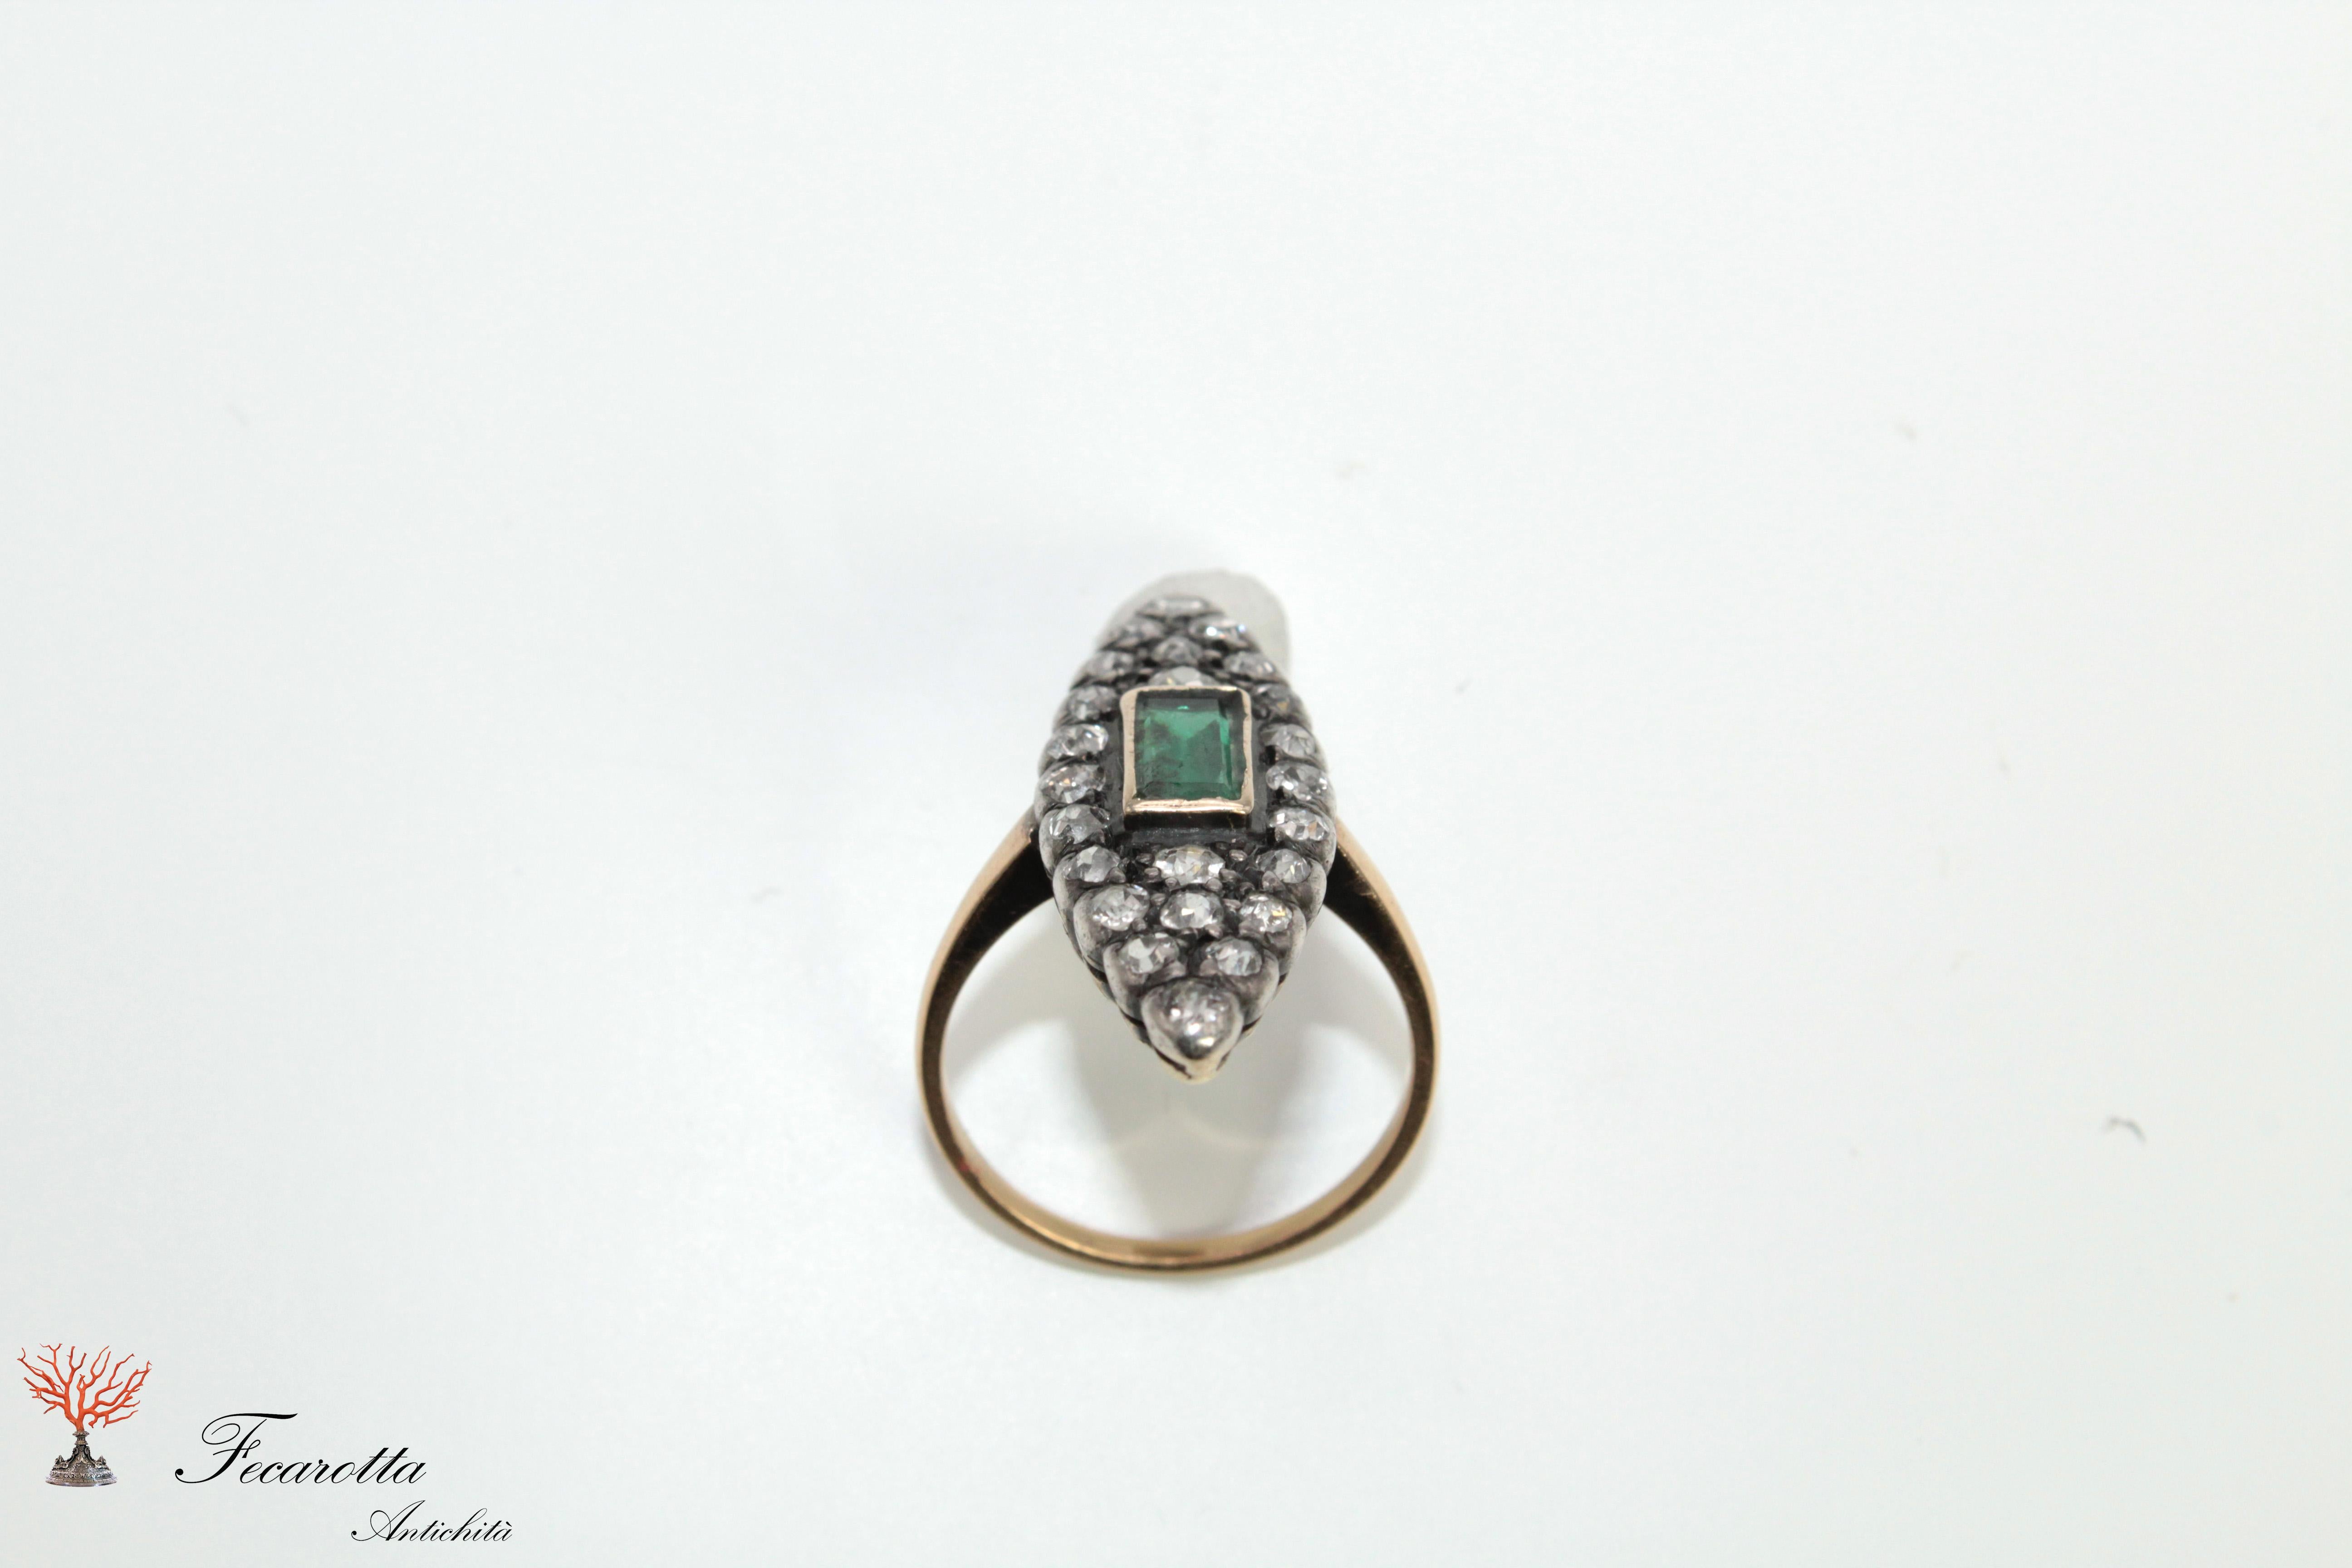 Late Victorian Emerald and Diamonds Cocktail Ring